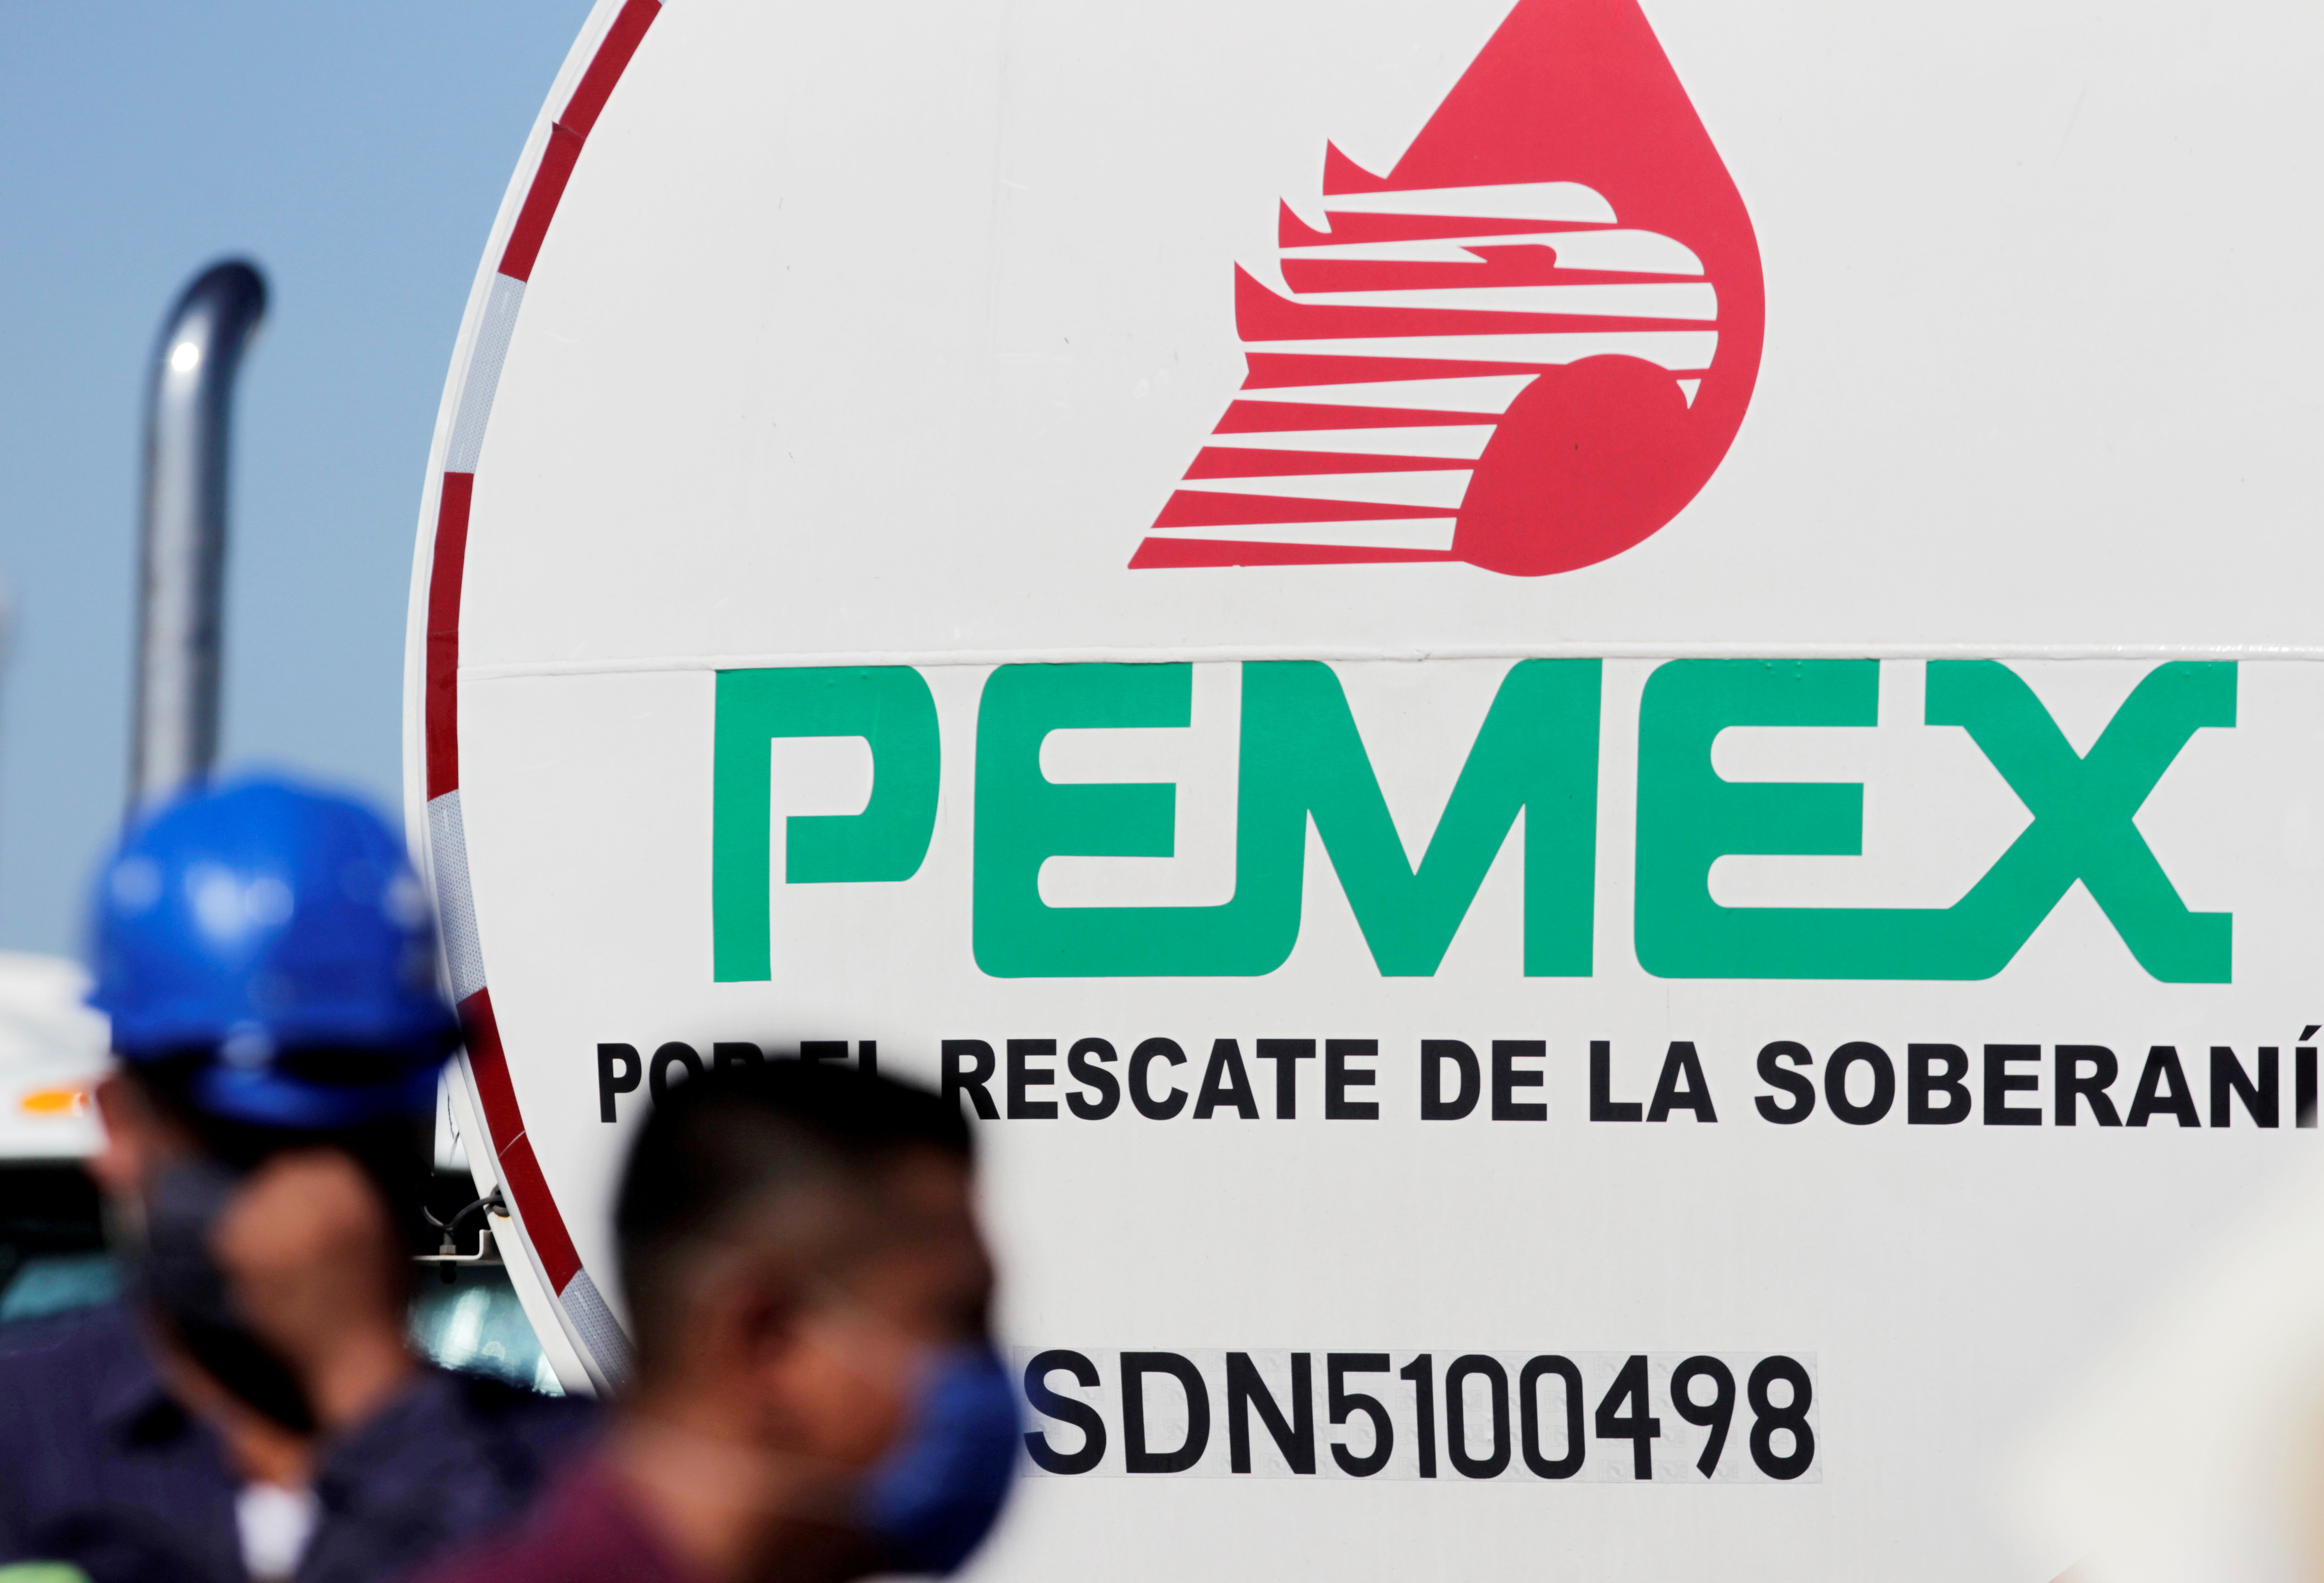 FILE PHOTO: A Pemex logo is pictured during a visit by Mexico's president, Andres Manuel Lopez Obrador, to Cadereyta refinery, Monterrey